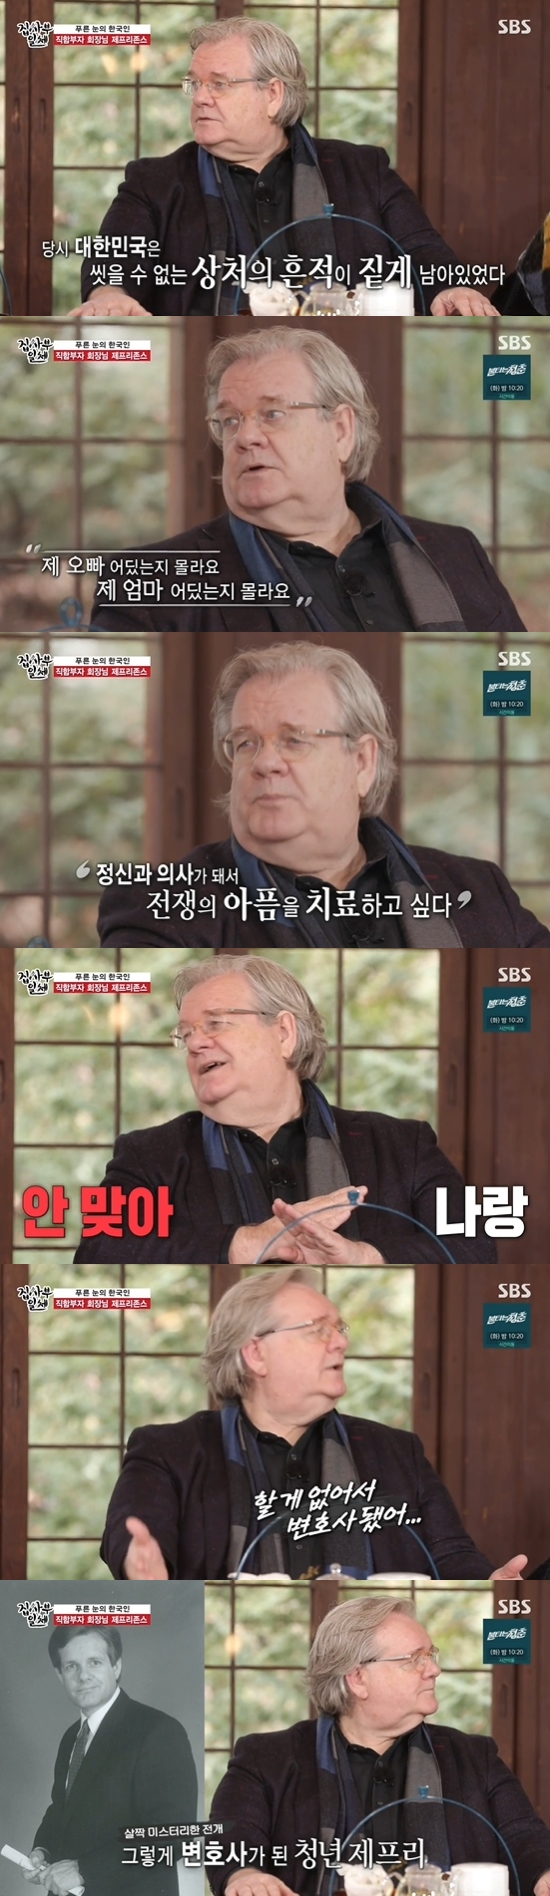 All The Butlers Jeffrey Quincy Jones appeared as master, revealing Korea love.Jeffrey Quincy Jones appeared on a motorcycle on SBS All The Butlers broadcast on the 17th.Jeffrey Quincy Jones appeared as the master of All The Butlers.Jeffrey Quincy Jones Korean name is Cho Jae-pil, the largest law firm in Korea, Lawyer, a nonprofit welfare organization foundation, and the chairman of the United States of America Chamber of Commerce in Korea.Jeffrey Quincy Jones revealed that he came to Korea to volunteer in 1971.At that time, he said, There is only a field around, and when I use natural feed, the airplane door opened and smelled.Other foreigners were embarrassed, but Feelings said that they came home. From the beginning, Feelings said that they heard extraordinary Feelings in Korea.I thought you were a Korean in your past life.Jeffrey Quincy Jones reveals he hates culture like if your cousin buys land, your stomach hurts among Korean cultureBut Jeffrey Quincy Jones laughed when he saw Jung Eun-woo and said, But I am so handsome that I am embryonic.Jeffrey Quincy Jones, sitting next to Jung Eun-woo, said he wanted to sit between Yang Se-hyeong and Kim Dong-hyun.Jeffrey Quincy Jones reveals why he became LawyerWhen I came to Korea in the past, I wanted to become a psychiatrist by seeing people who were struggling with family problems after the Korean War, but when I studied, I became a Lawyer because I did not fit.Jeffrey Quincy Jones said, I was Lawyer because I had nothing to do.Jeffrey Quincy Jones has revealed that the defense of footballer Park Jong-woo remains in the most memory.Park Jong-woo was in danger of depriving Bronze medal by lifting the placard Dokdo is our land in the London 2012 Olympic Bronze medal match.Jeffrey Quincy Jones recalled the time when he was happy, saying, I played Park Jong-woo as Lawyer and won a medal again.Jeffrey Quincy Jones served as chairman of the United States of America Chamber of Commerce in Korea during the financial crisis and was a Prayer to discuss economic revitalization with former President Kim Dae-jung.Also, Jeffrey Quincy Jones has revealed that he is working on building a house for families of children at his nonprofit foundation RMHC.Theres nothing better than this, said Jeffrey Quincy Jones, who said: Theres something I always say.I want to be a useful person.That is the goal of my life, he said. I think I will be happy if I remember that people were he was very useful after I died. Photo = SBS Broadcasting Screen